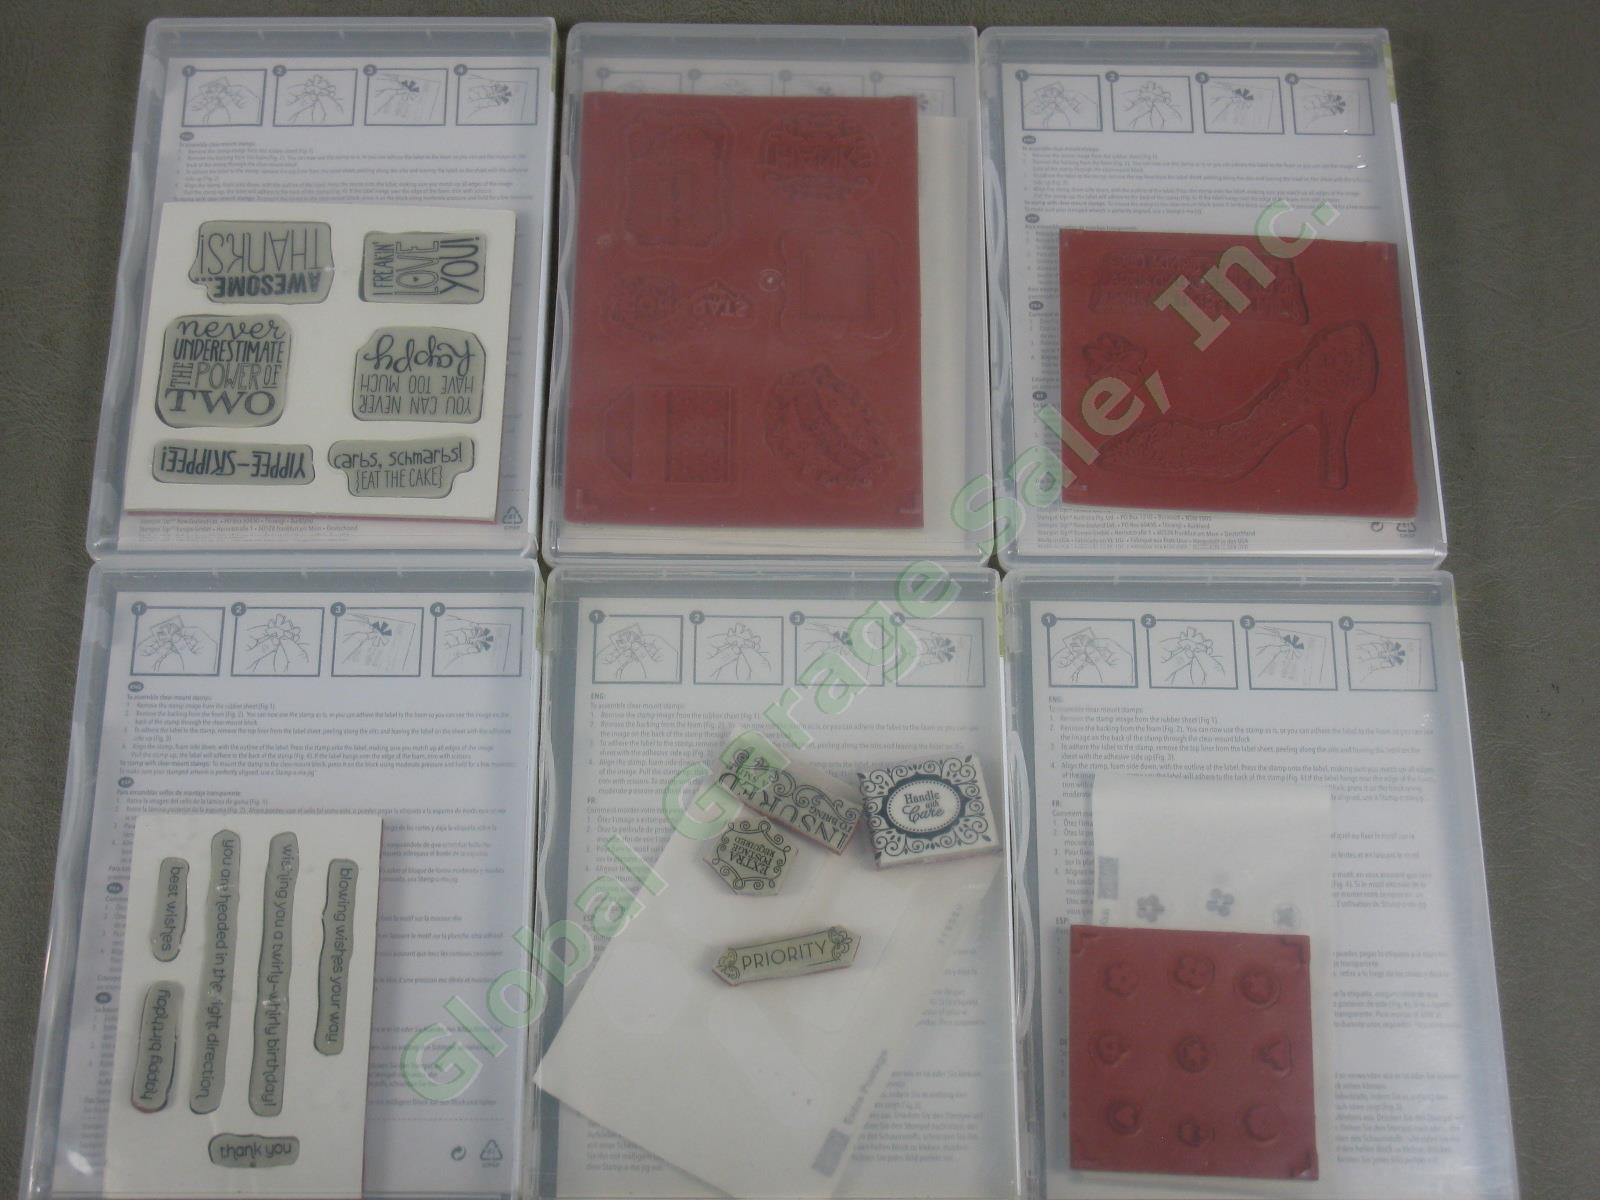 125 Stampin Up Clear Mount Rubber Stamp Lot Tagtastic Sunny Fun Petite Pairs NR! 9